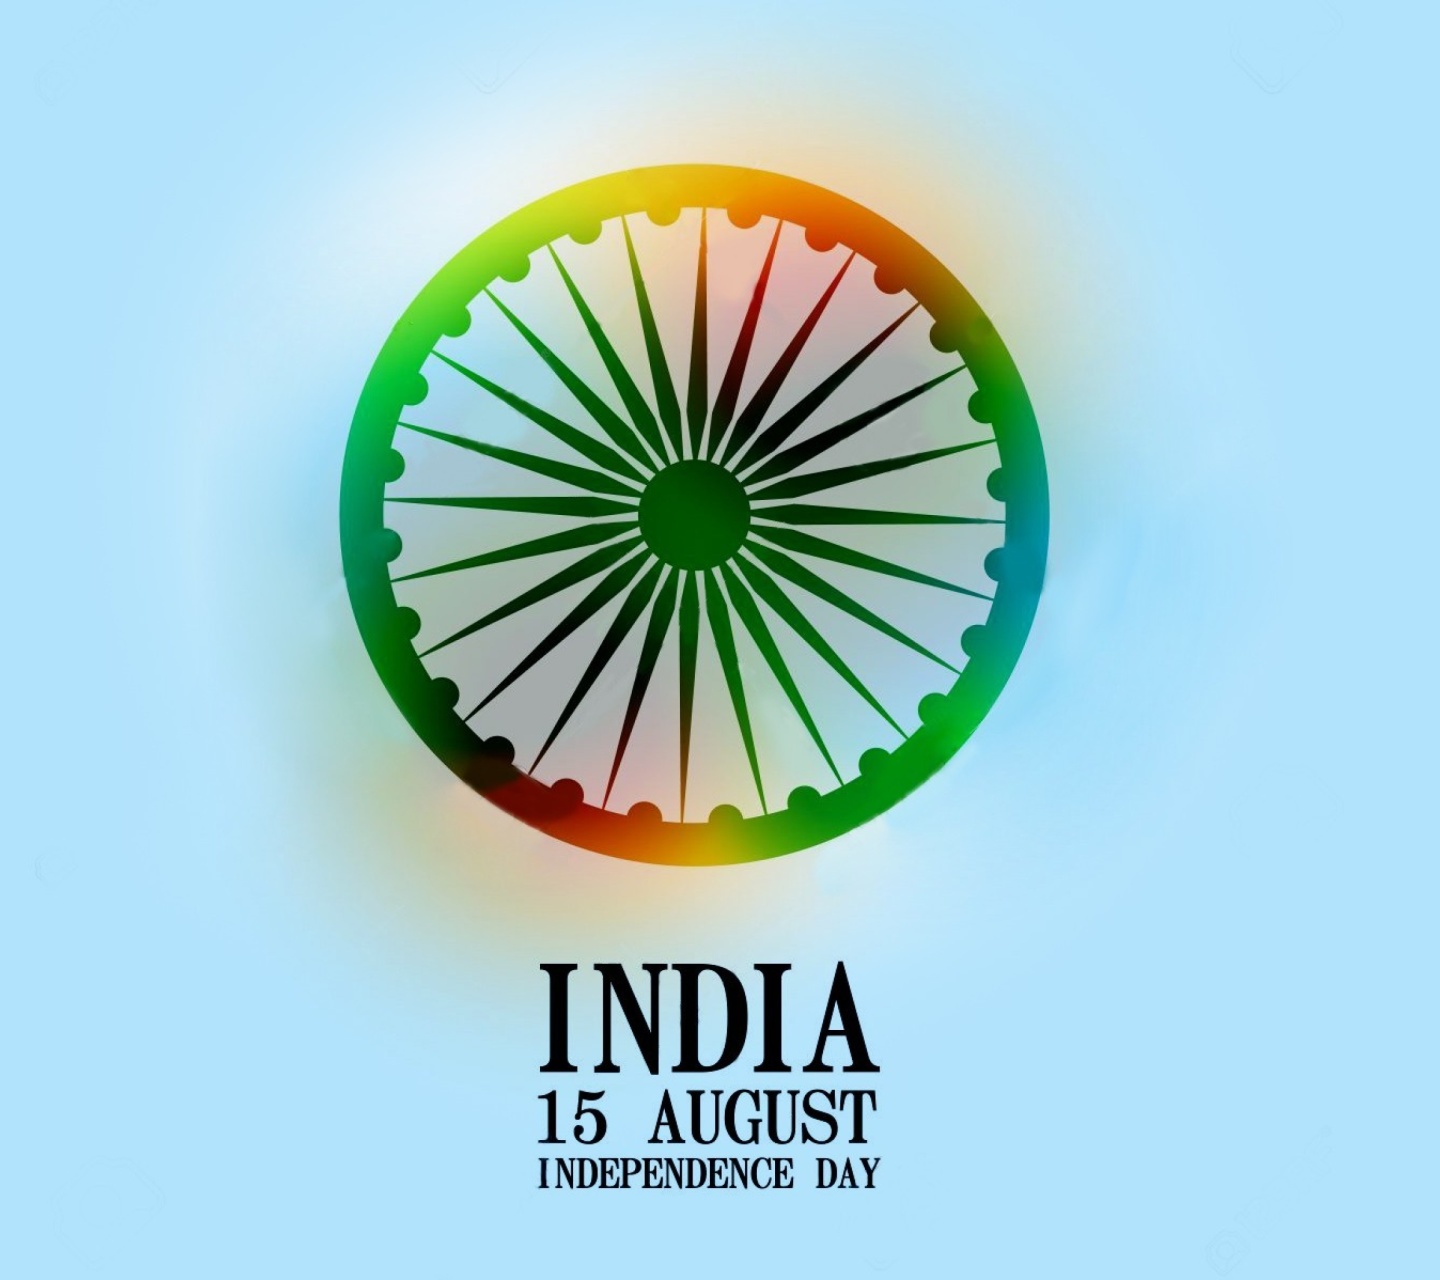 India Independence Day 15 August wallpaper 1440x1280